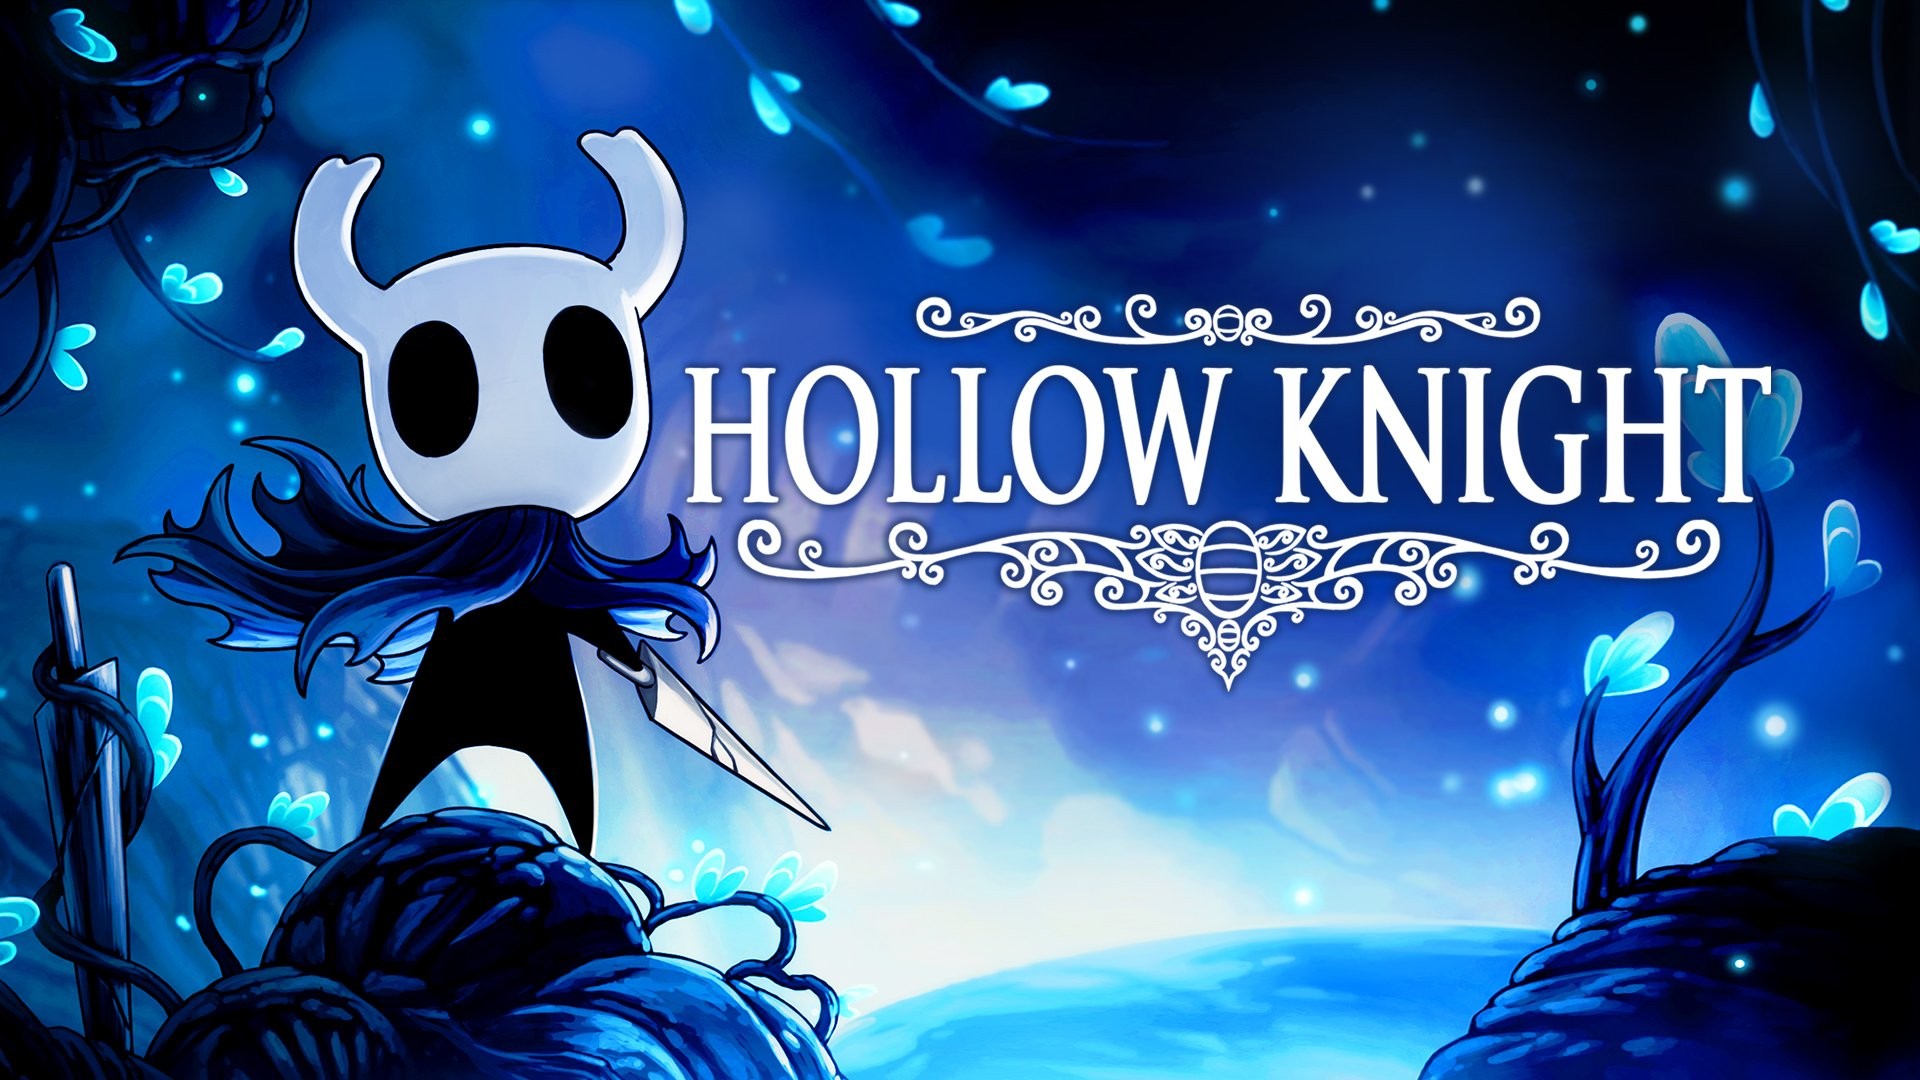 Hollow Knight Wallpaper For Desktop with high-resolution 1920x1080 pixel. You can use this wallpaper for your Windows and Mac OS computers as well as your Android and iPhone smartphones